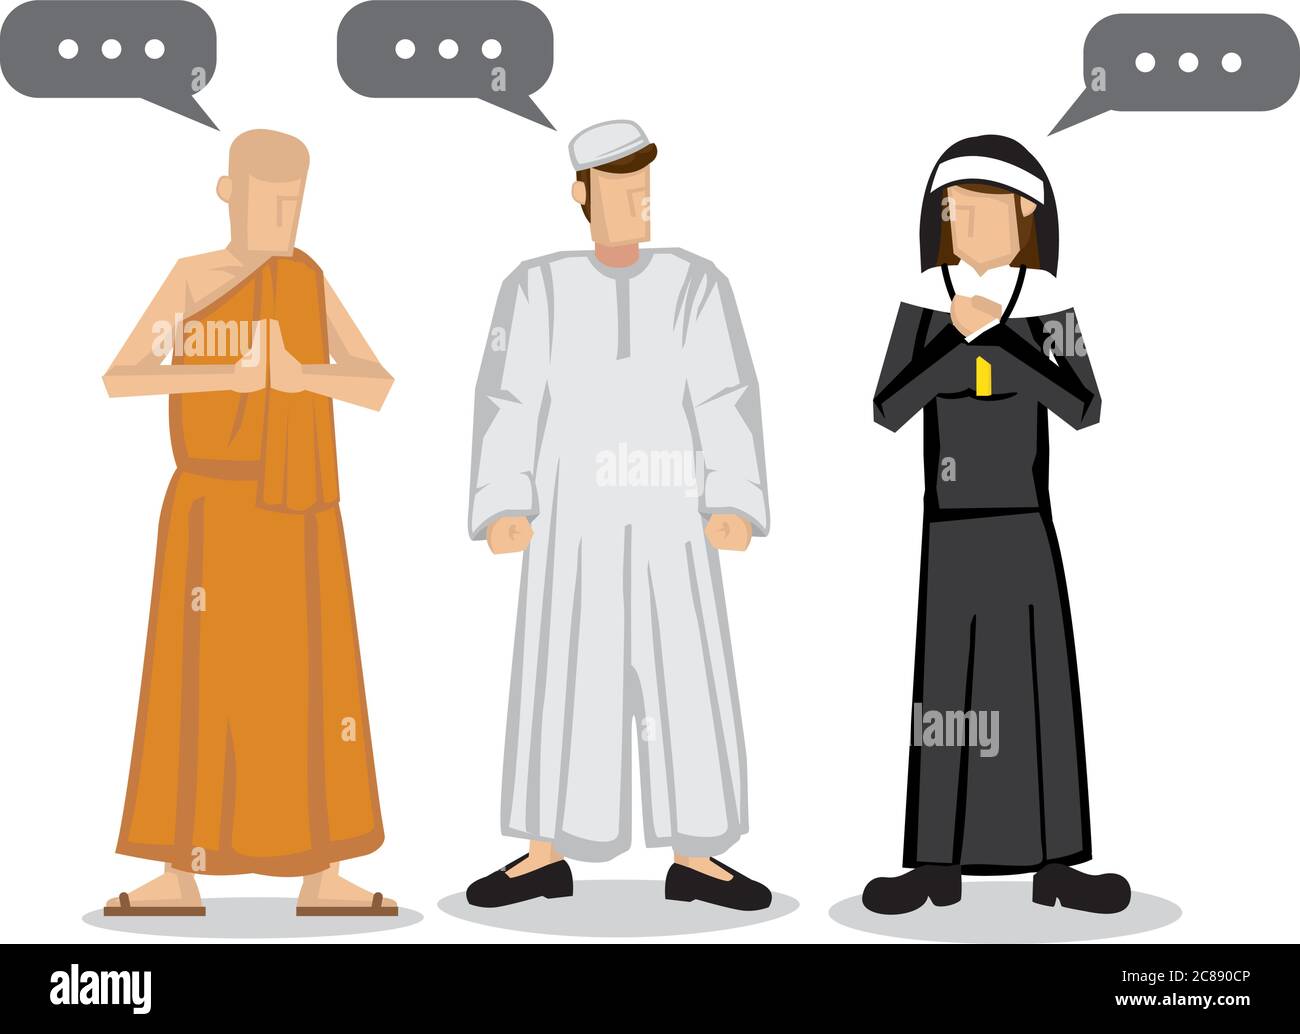 People of different religions. Islam Muslim, Buddhism monk and a christianity nun. Friendship and peace conversation between religion characters. Flat Stock Vector